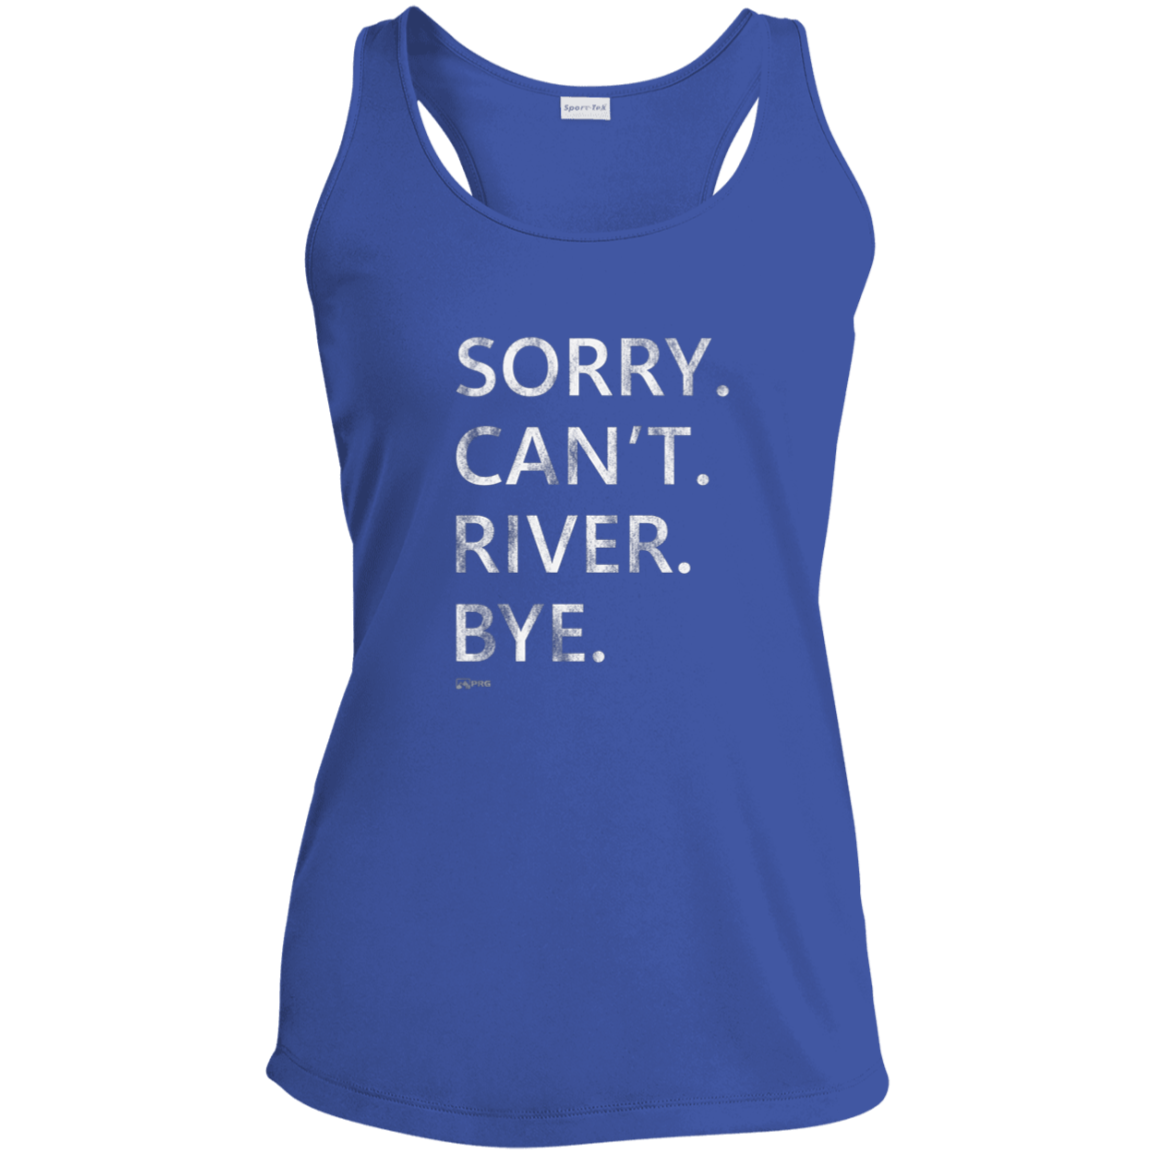 Sorry. Can't. River. Bye. - Womens Racerback